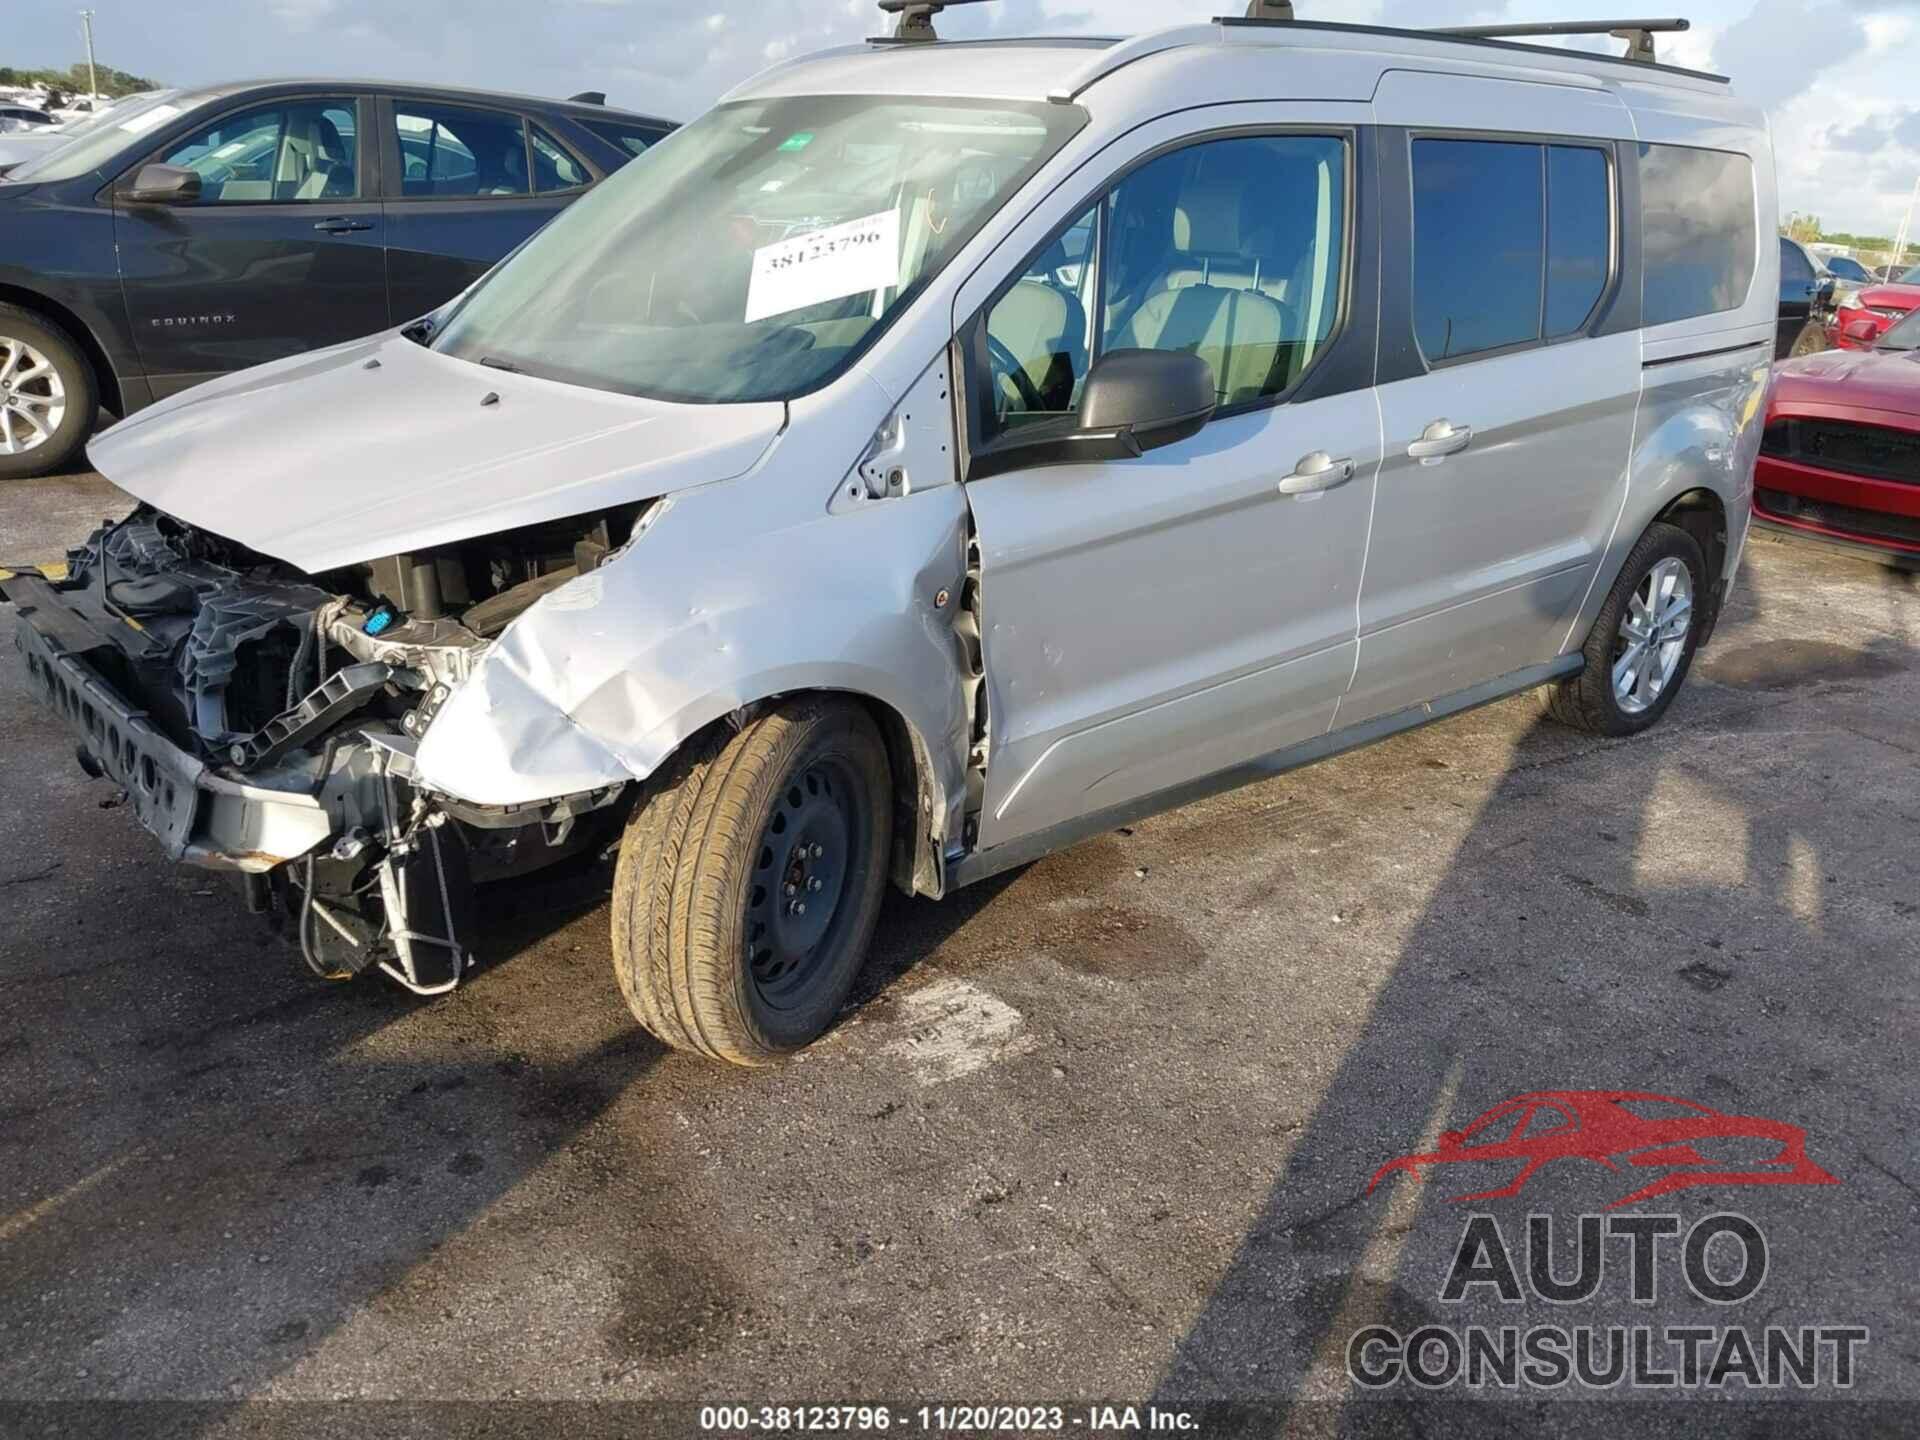 FORD TRANSIT CONNECT 2016 - NM0GE9F72G1289859